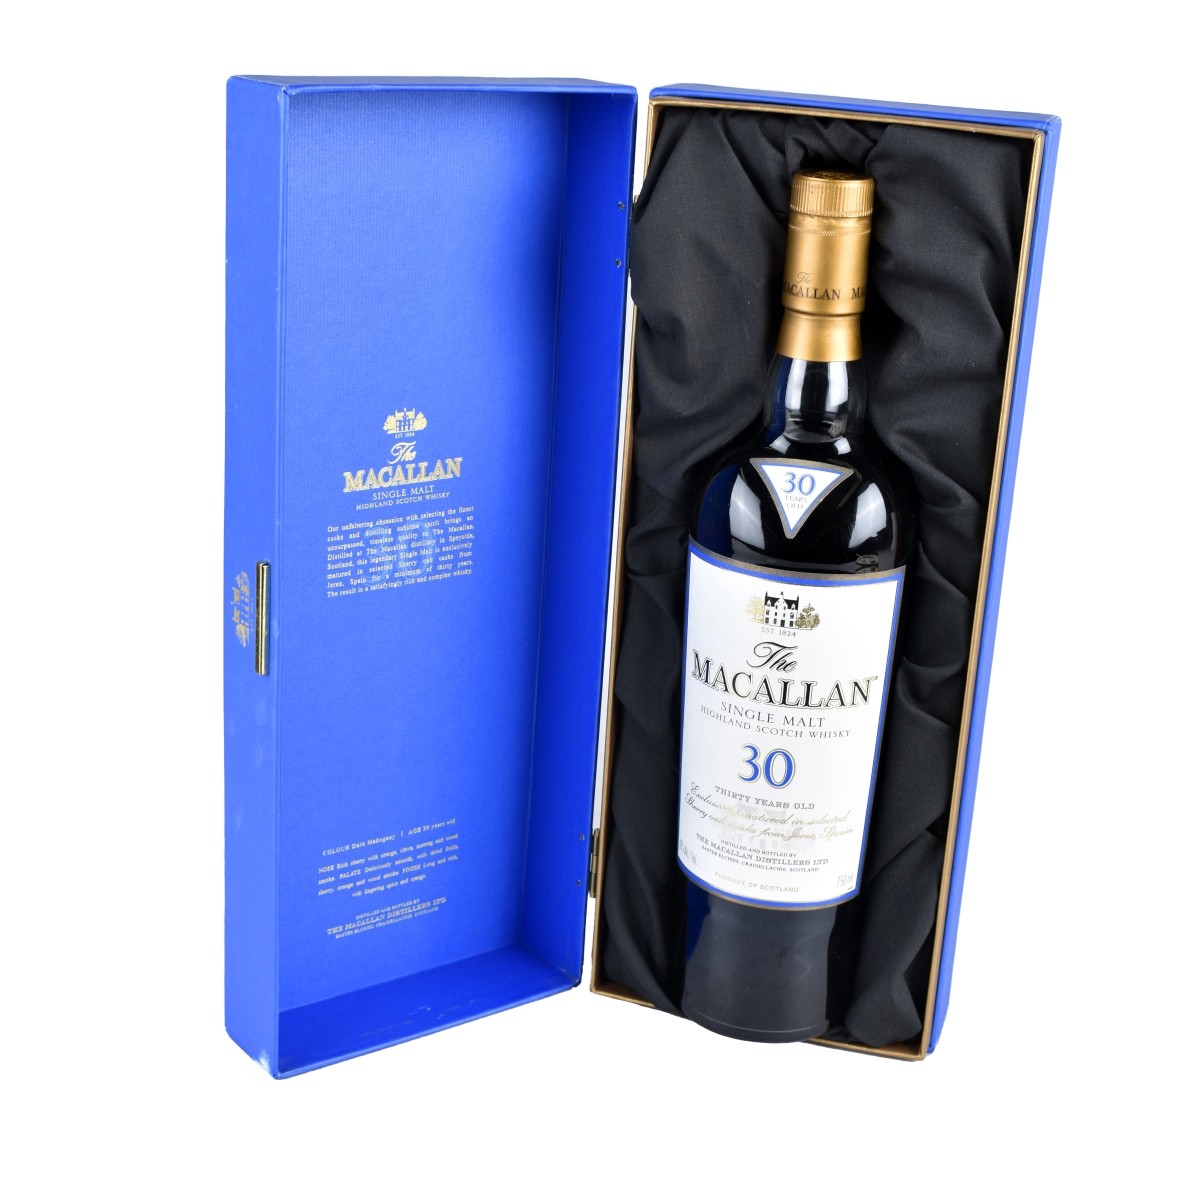 Macallan 30 Years Old Scotch Whisky